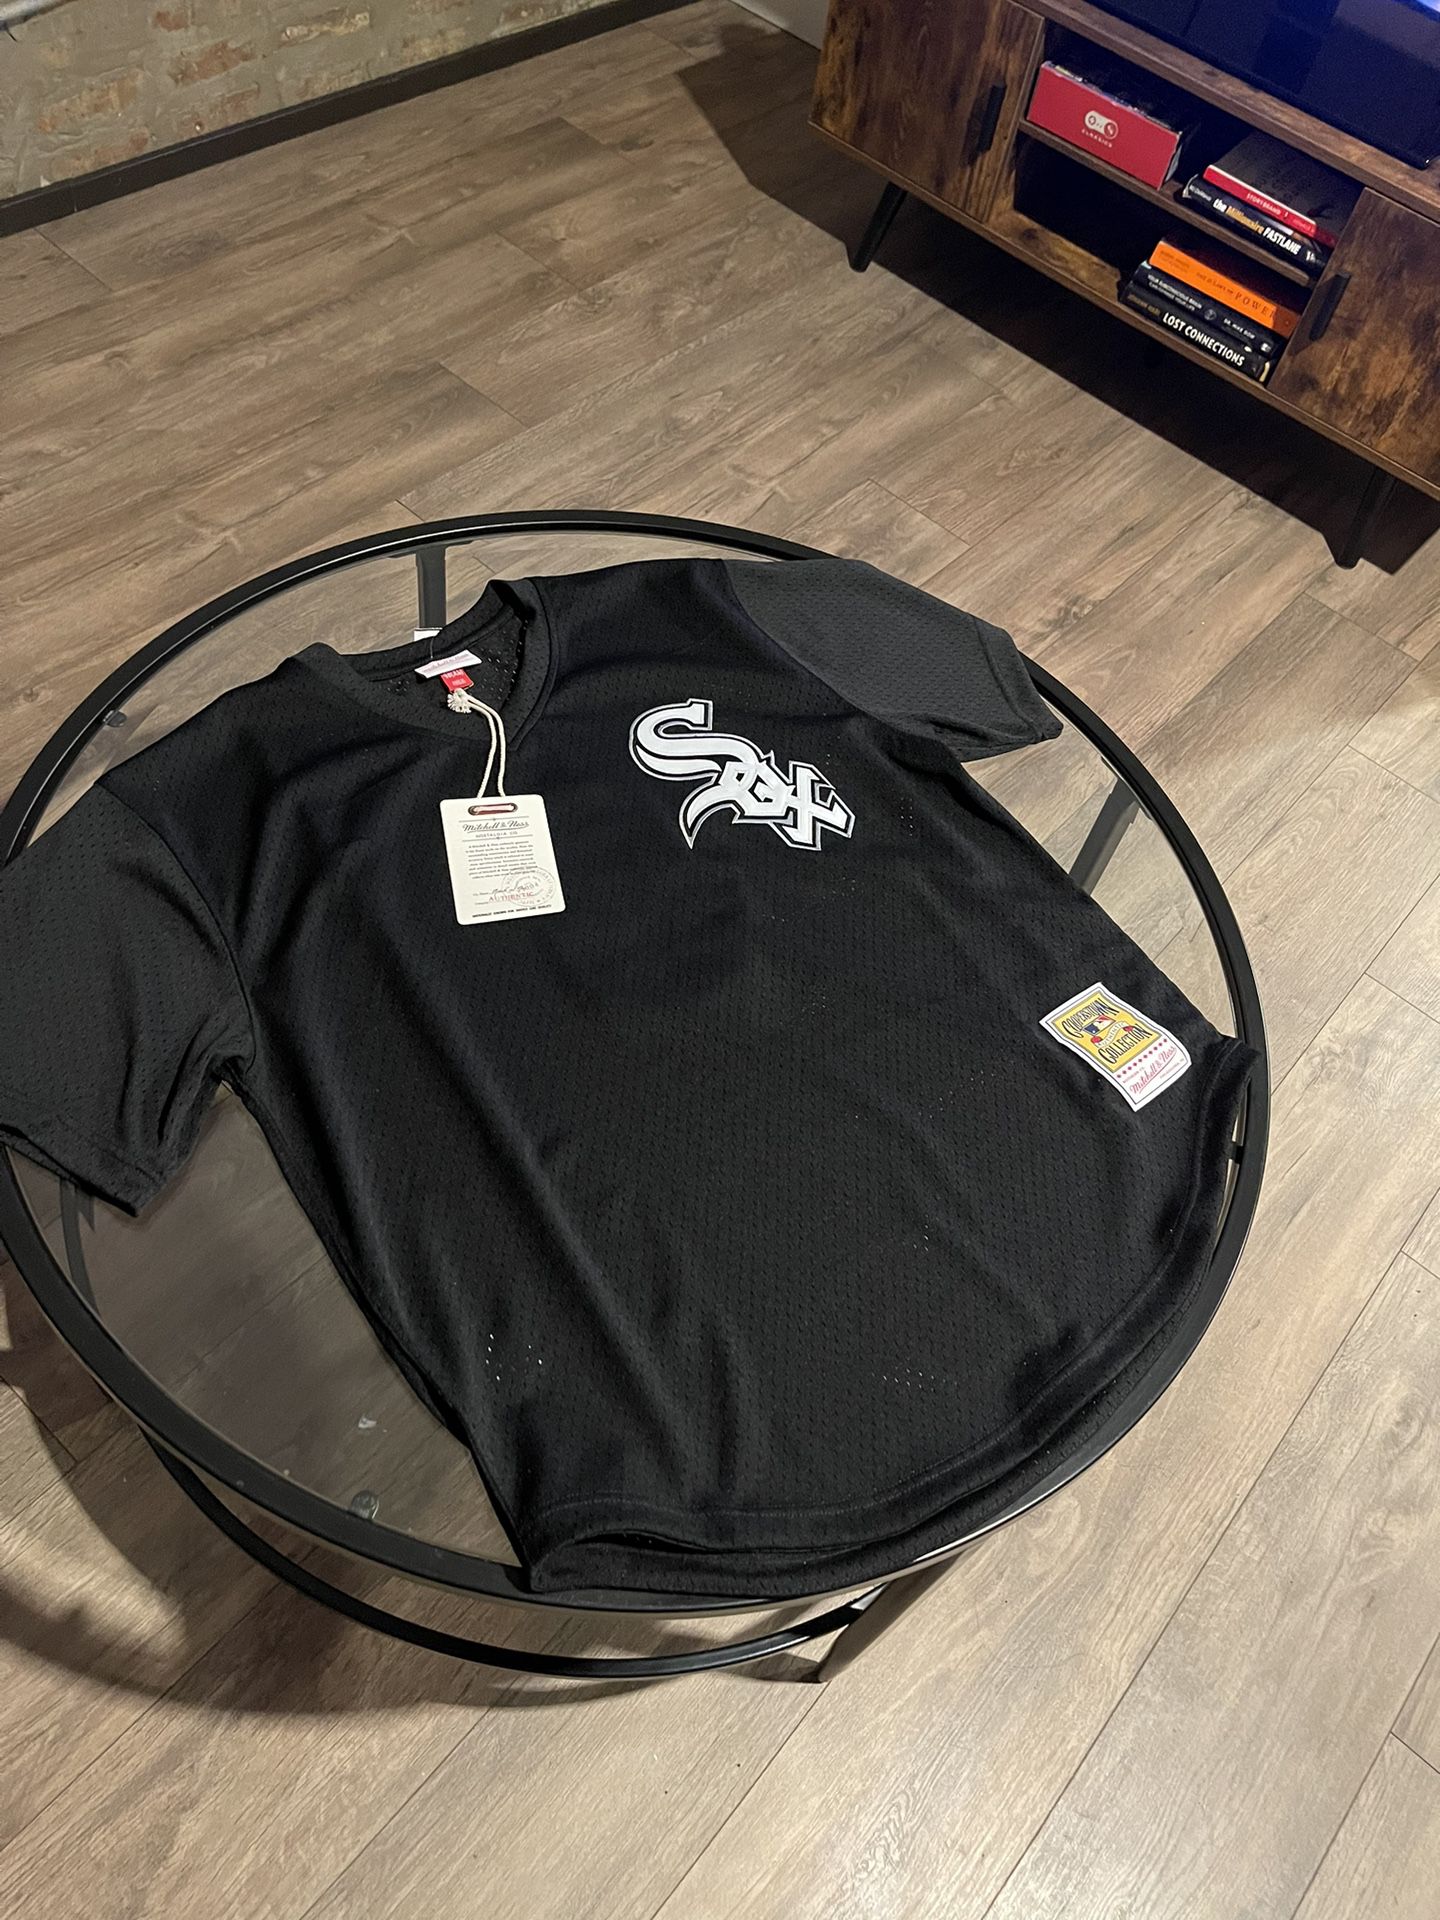 Chicago White Sox Medium M Baseball Jersey Shirt - clothing & accessories -  by owner - apparel sale - craigslist